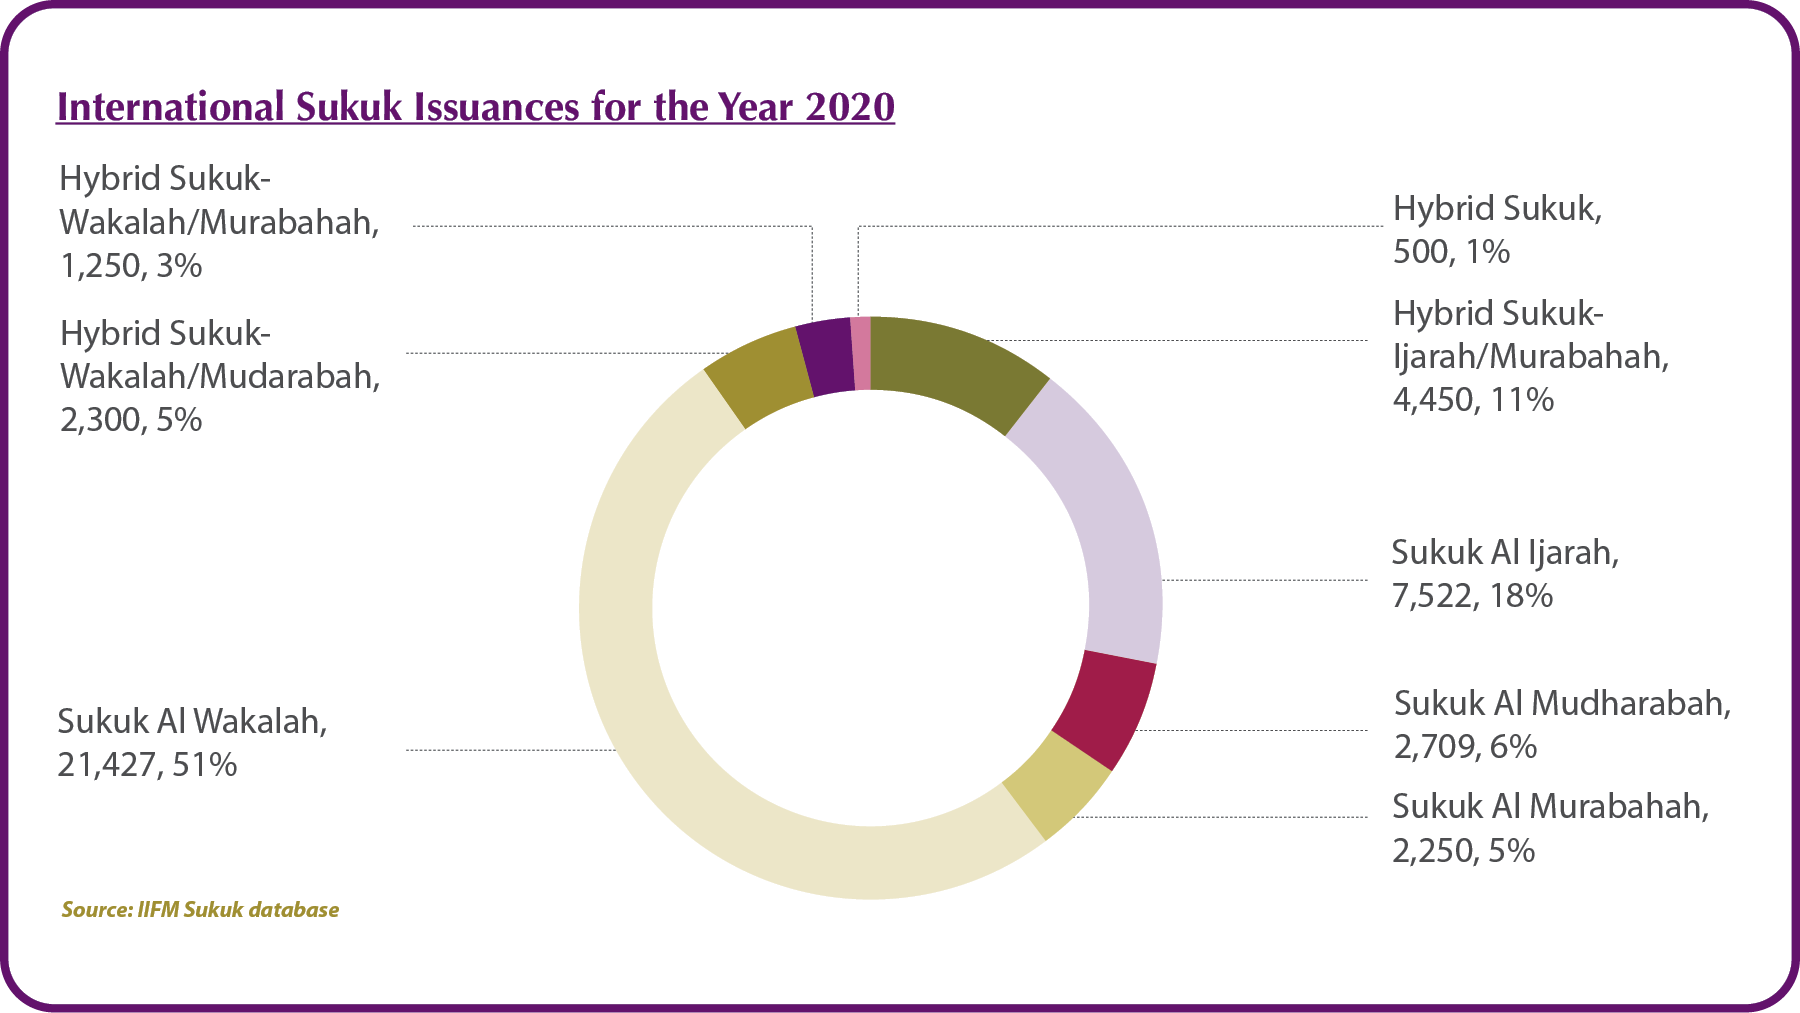 International Sukuk Issuances for the Year 2020